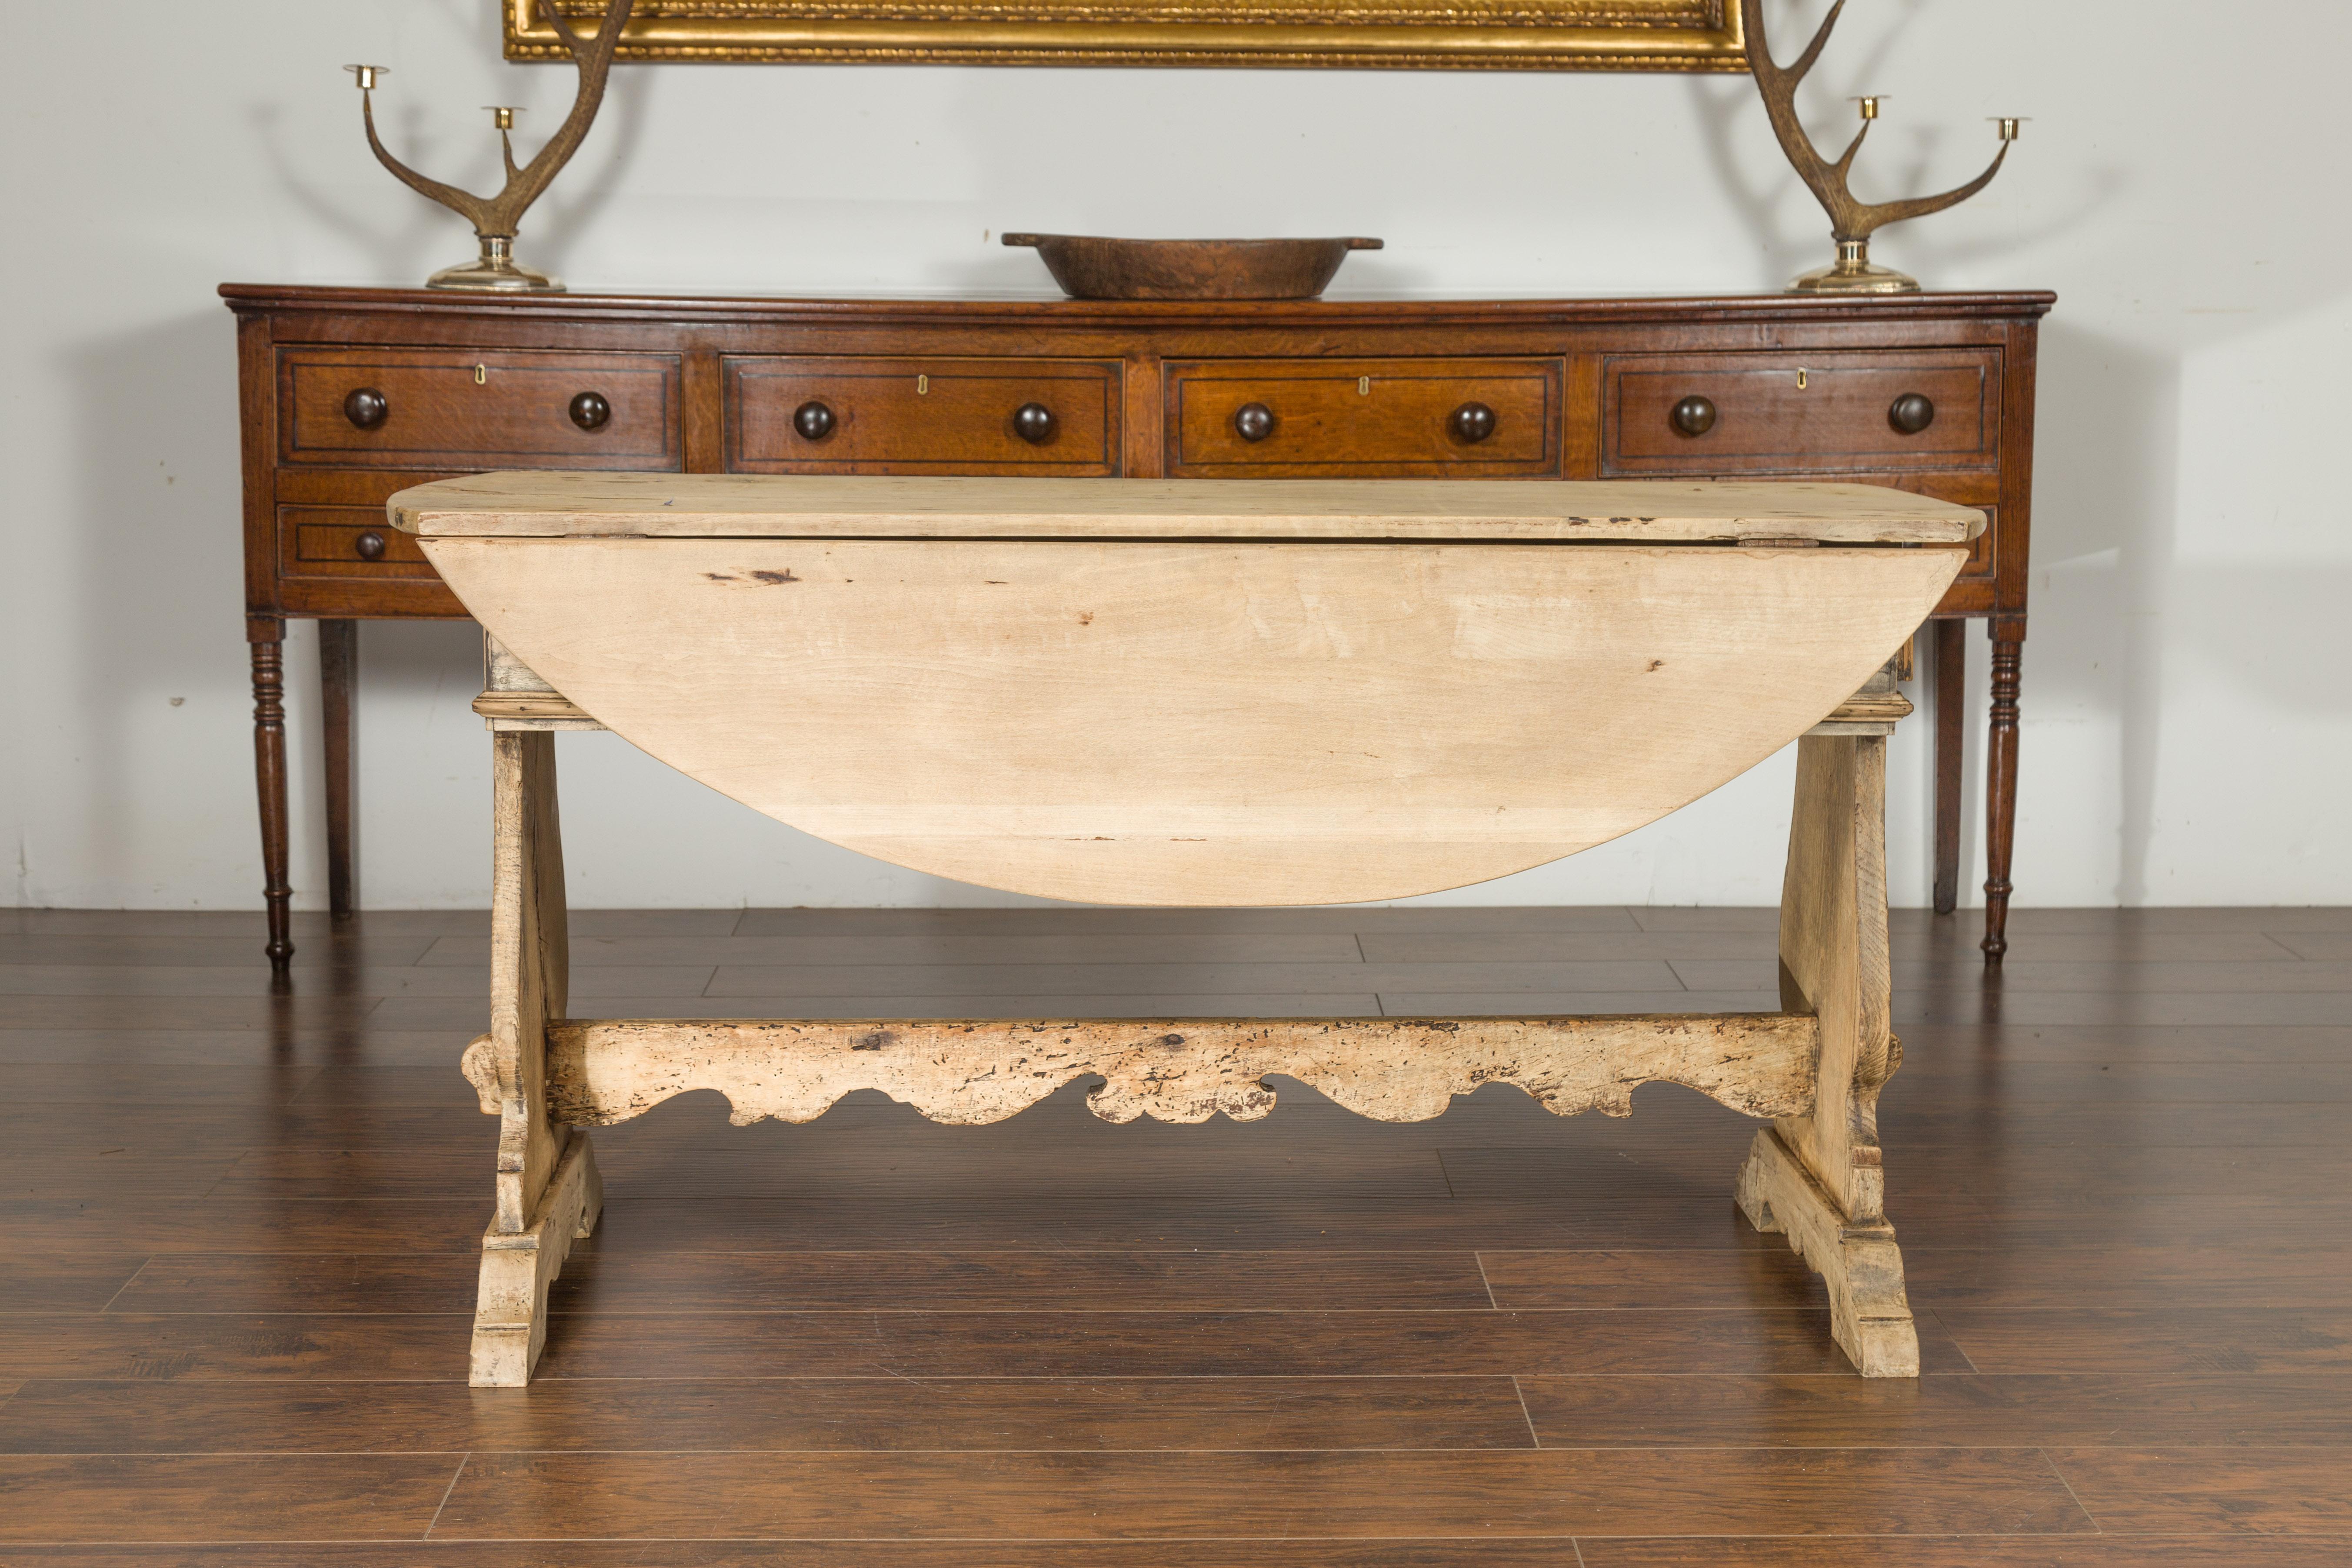 An Oval Italian bleached walnut drop-leaf table from the early 19th century, with trestle base and lateral drawers. Born in Italy during the early years of the 19th century, this Italian table features an oval drop-leaf top. The top sits on a